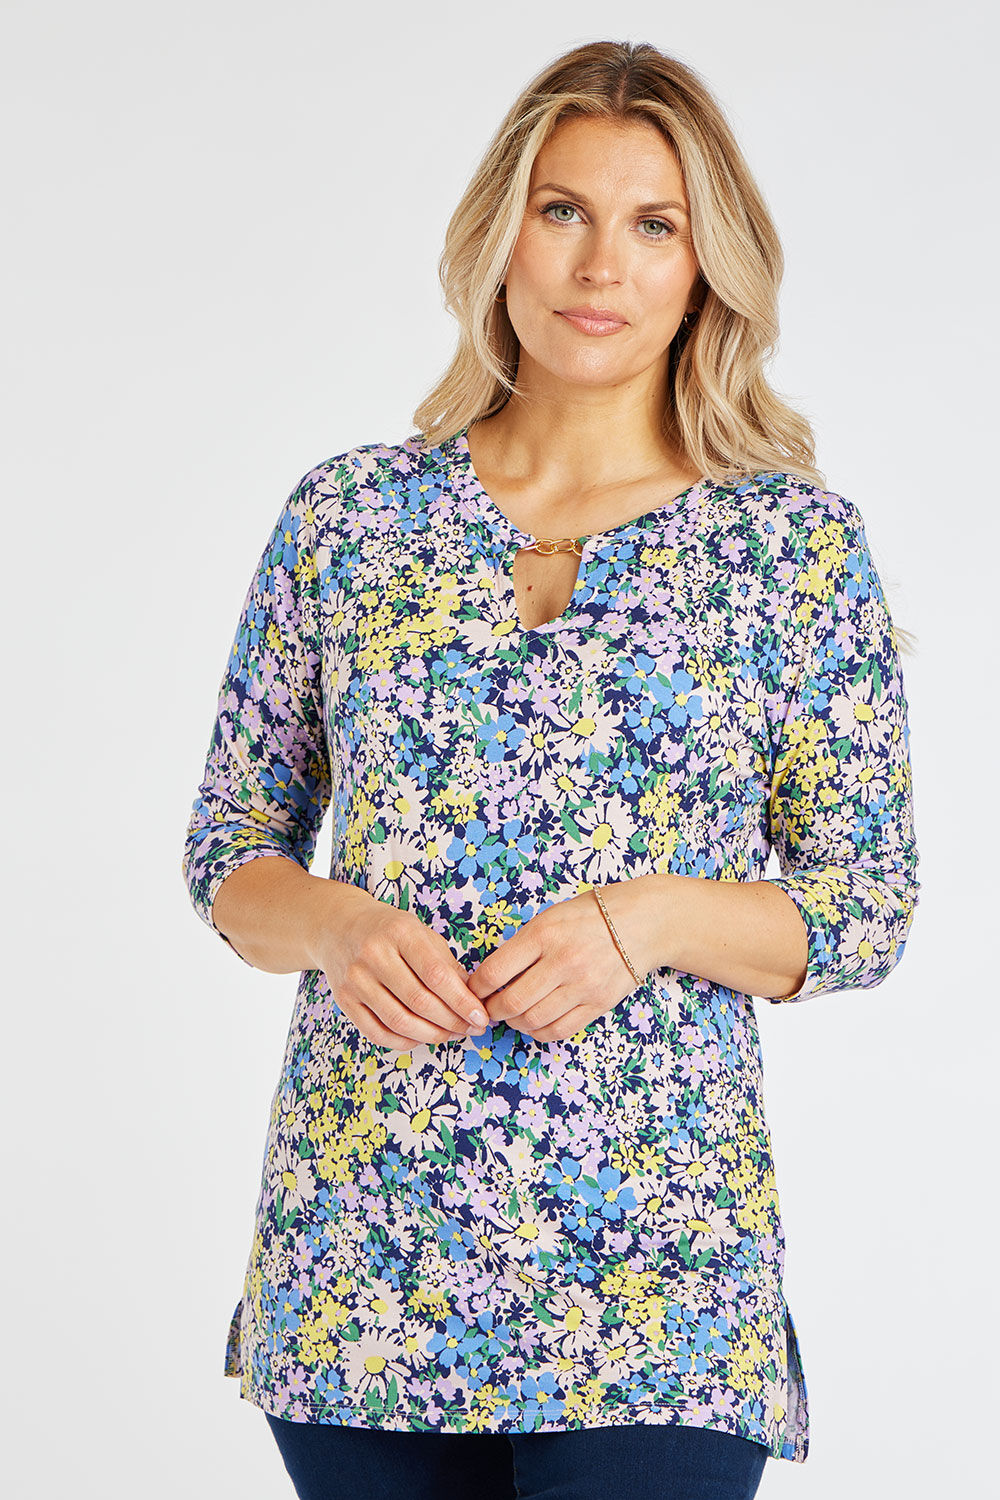 Bonmarche Multi 3/4 Sleeve Ditsy Floral Print Tunic, Size: 10